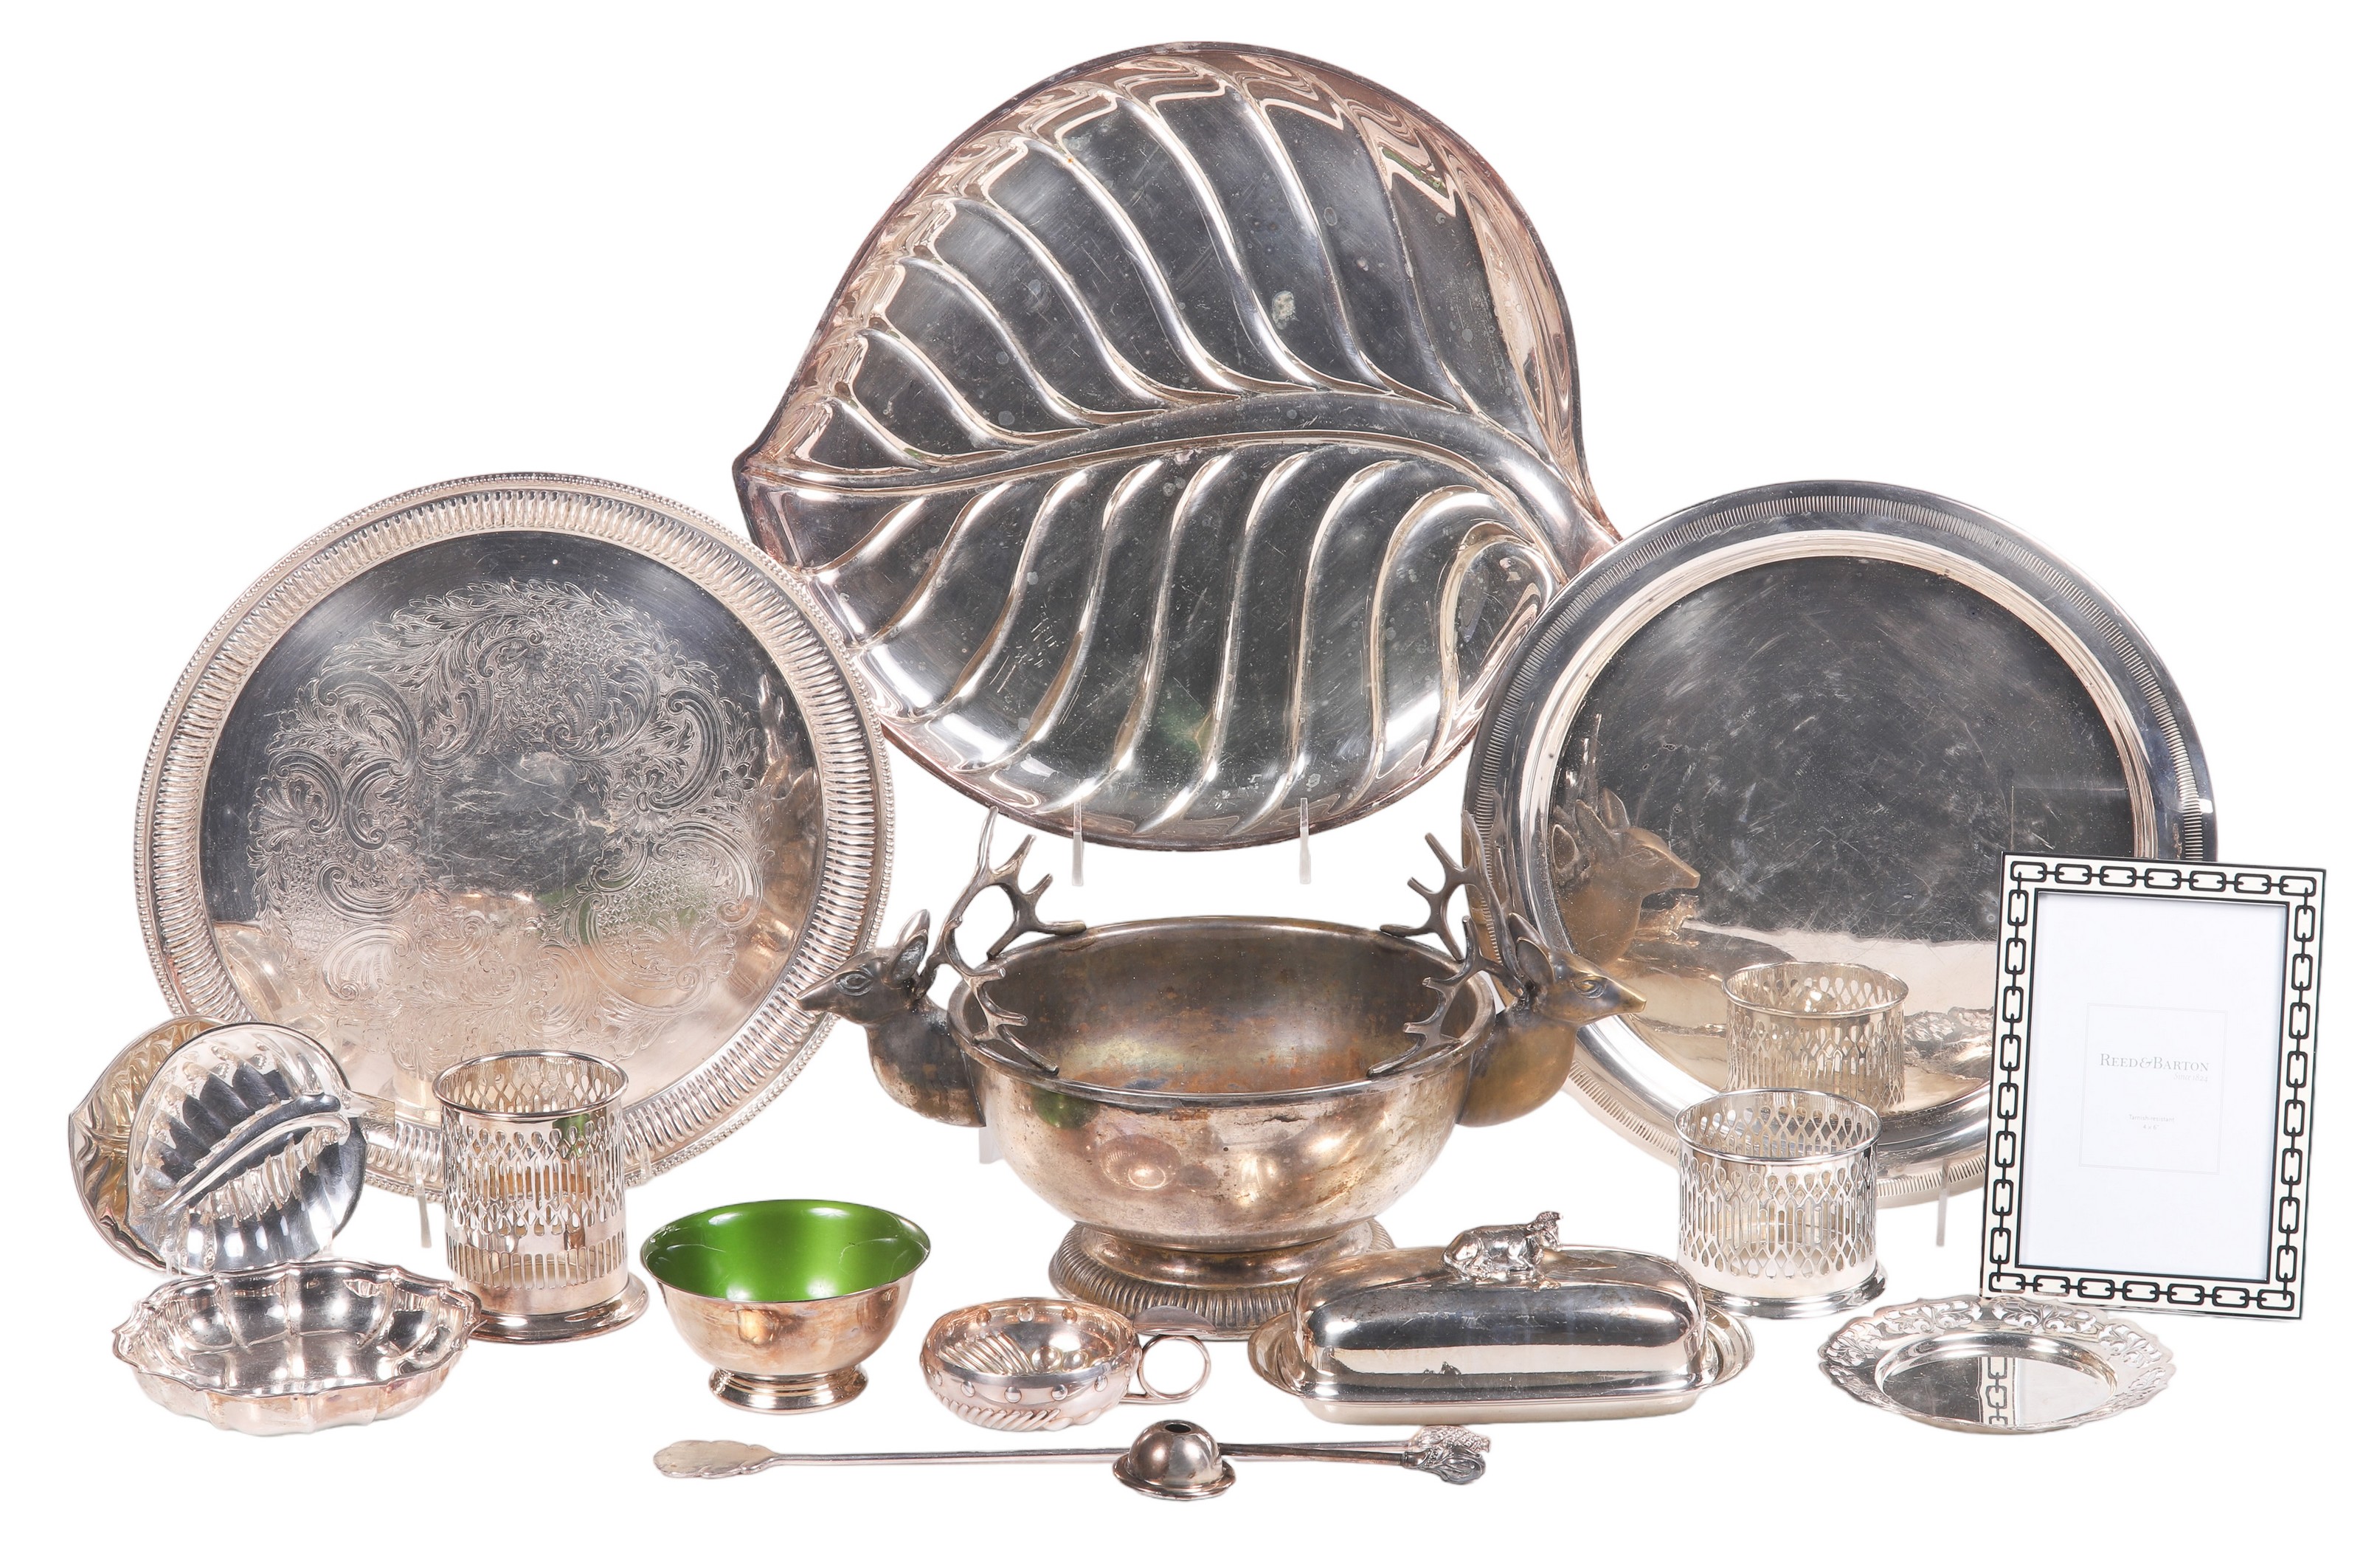 Lot of silver plate including 2e104d